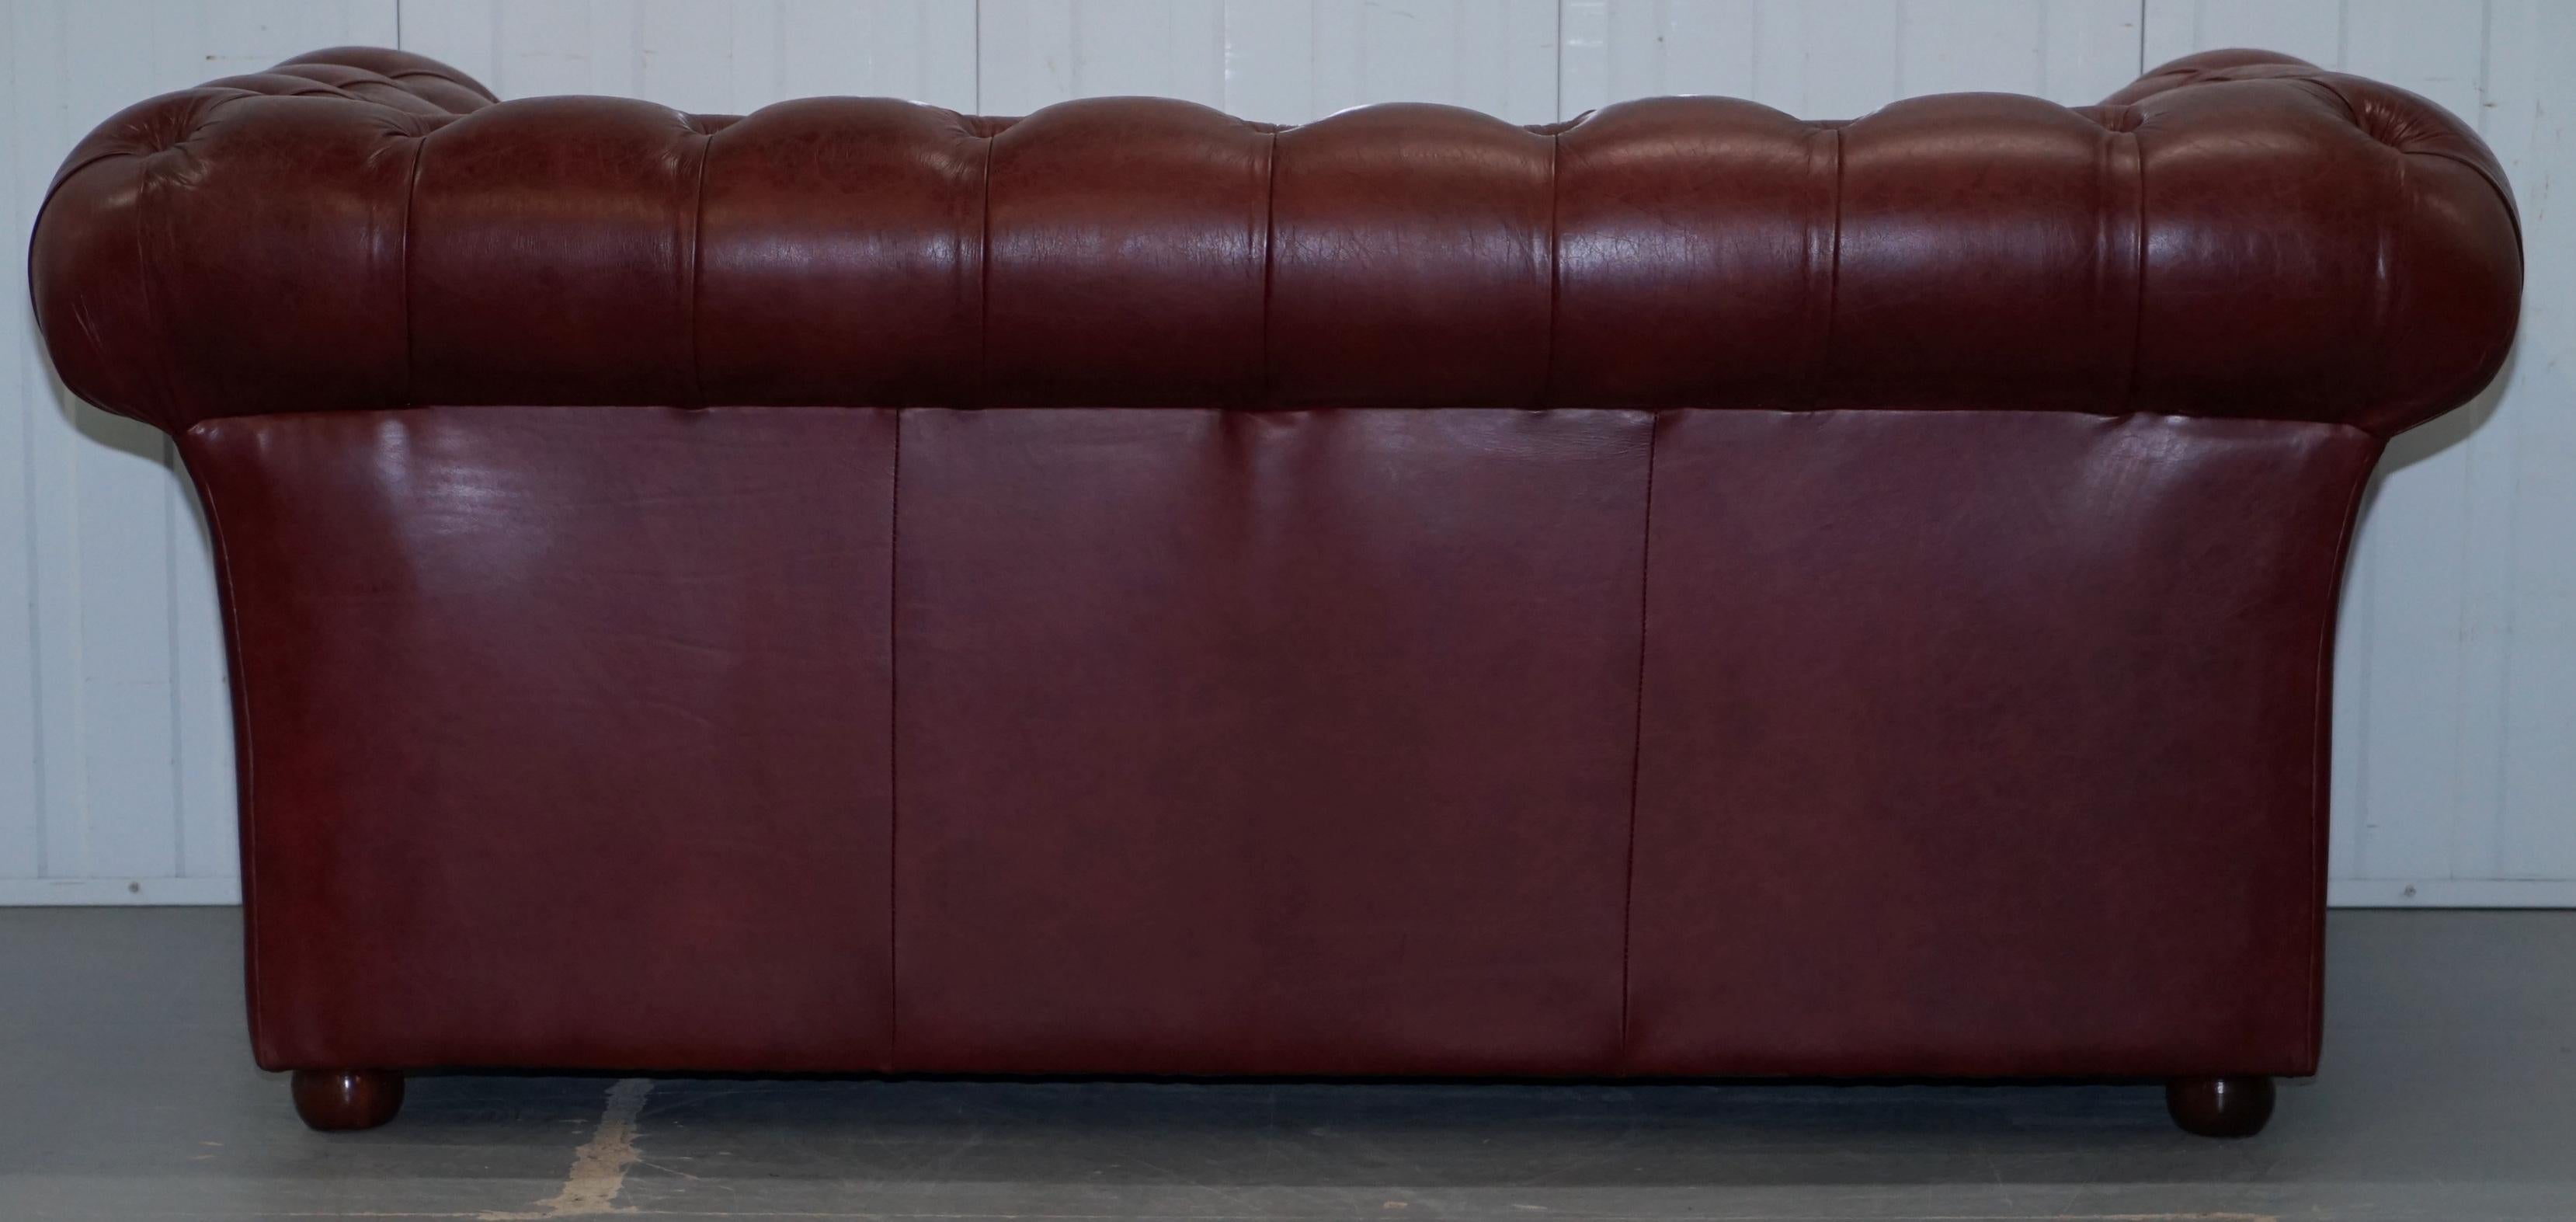  Tetrad England Reddish Brown Leather Chesterfield Sofa Part of Suite 11